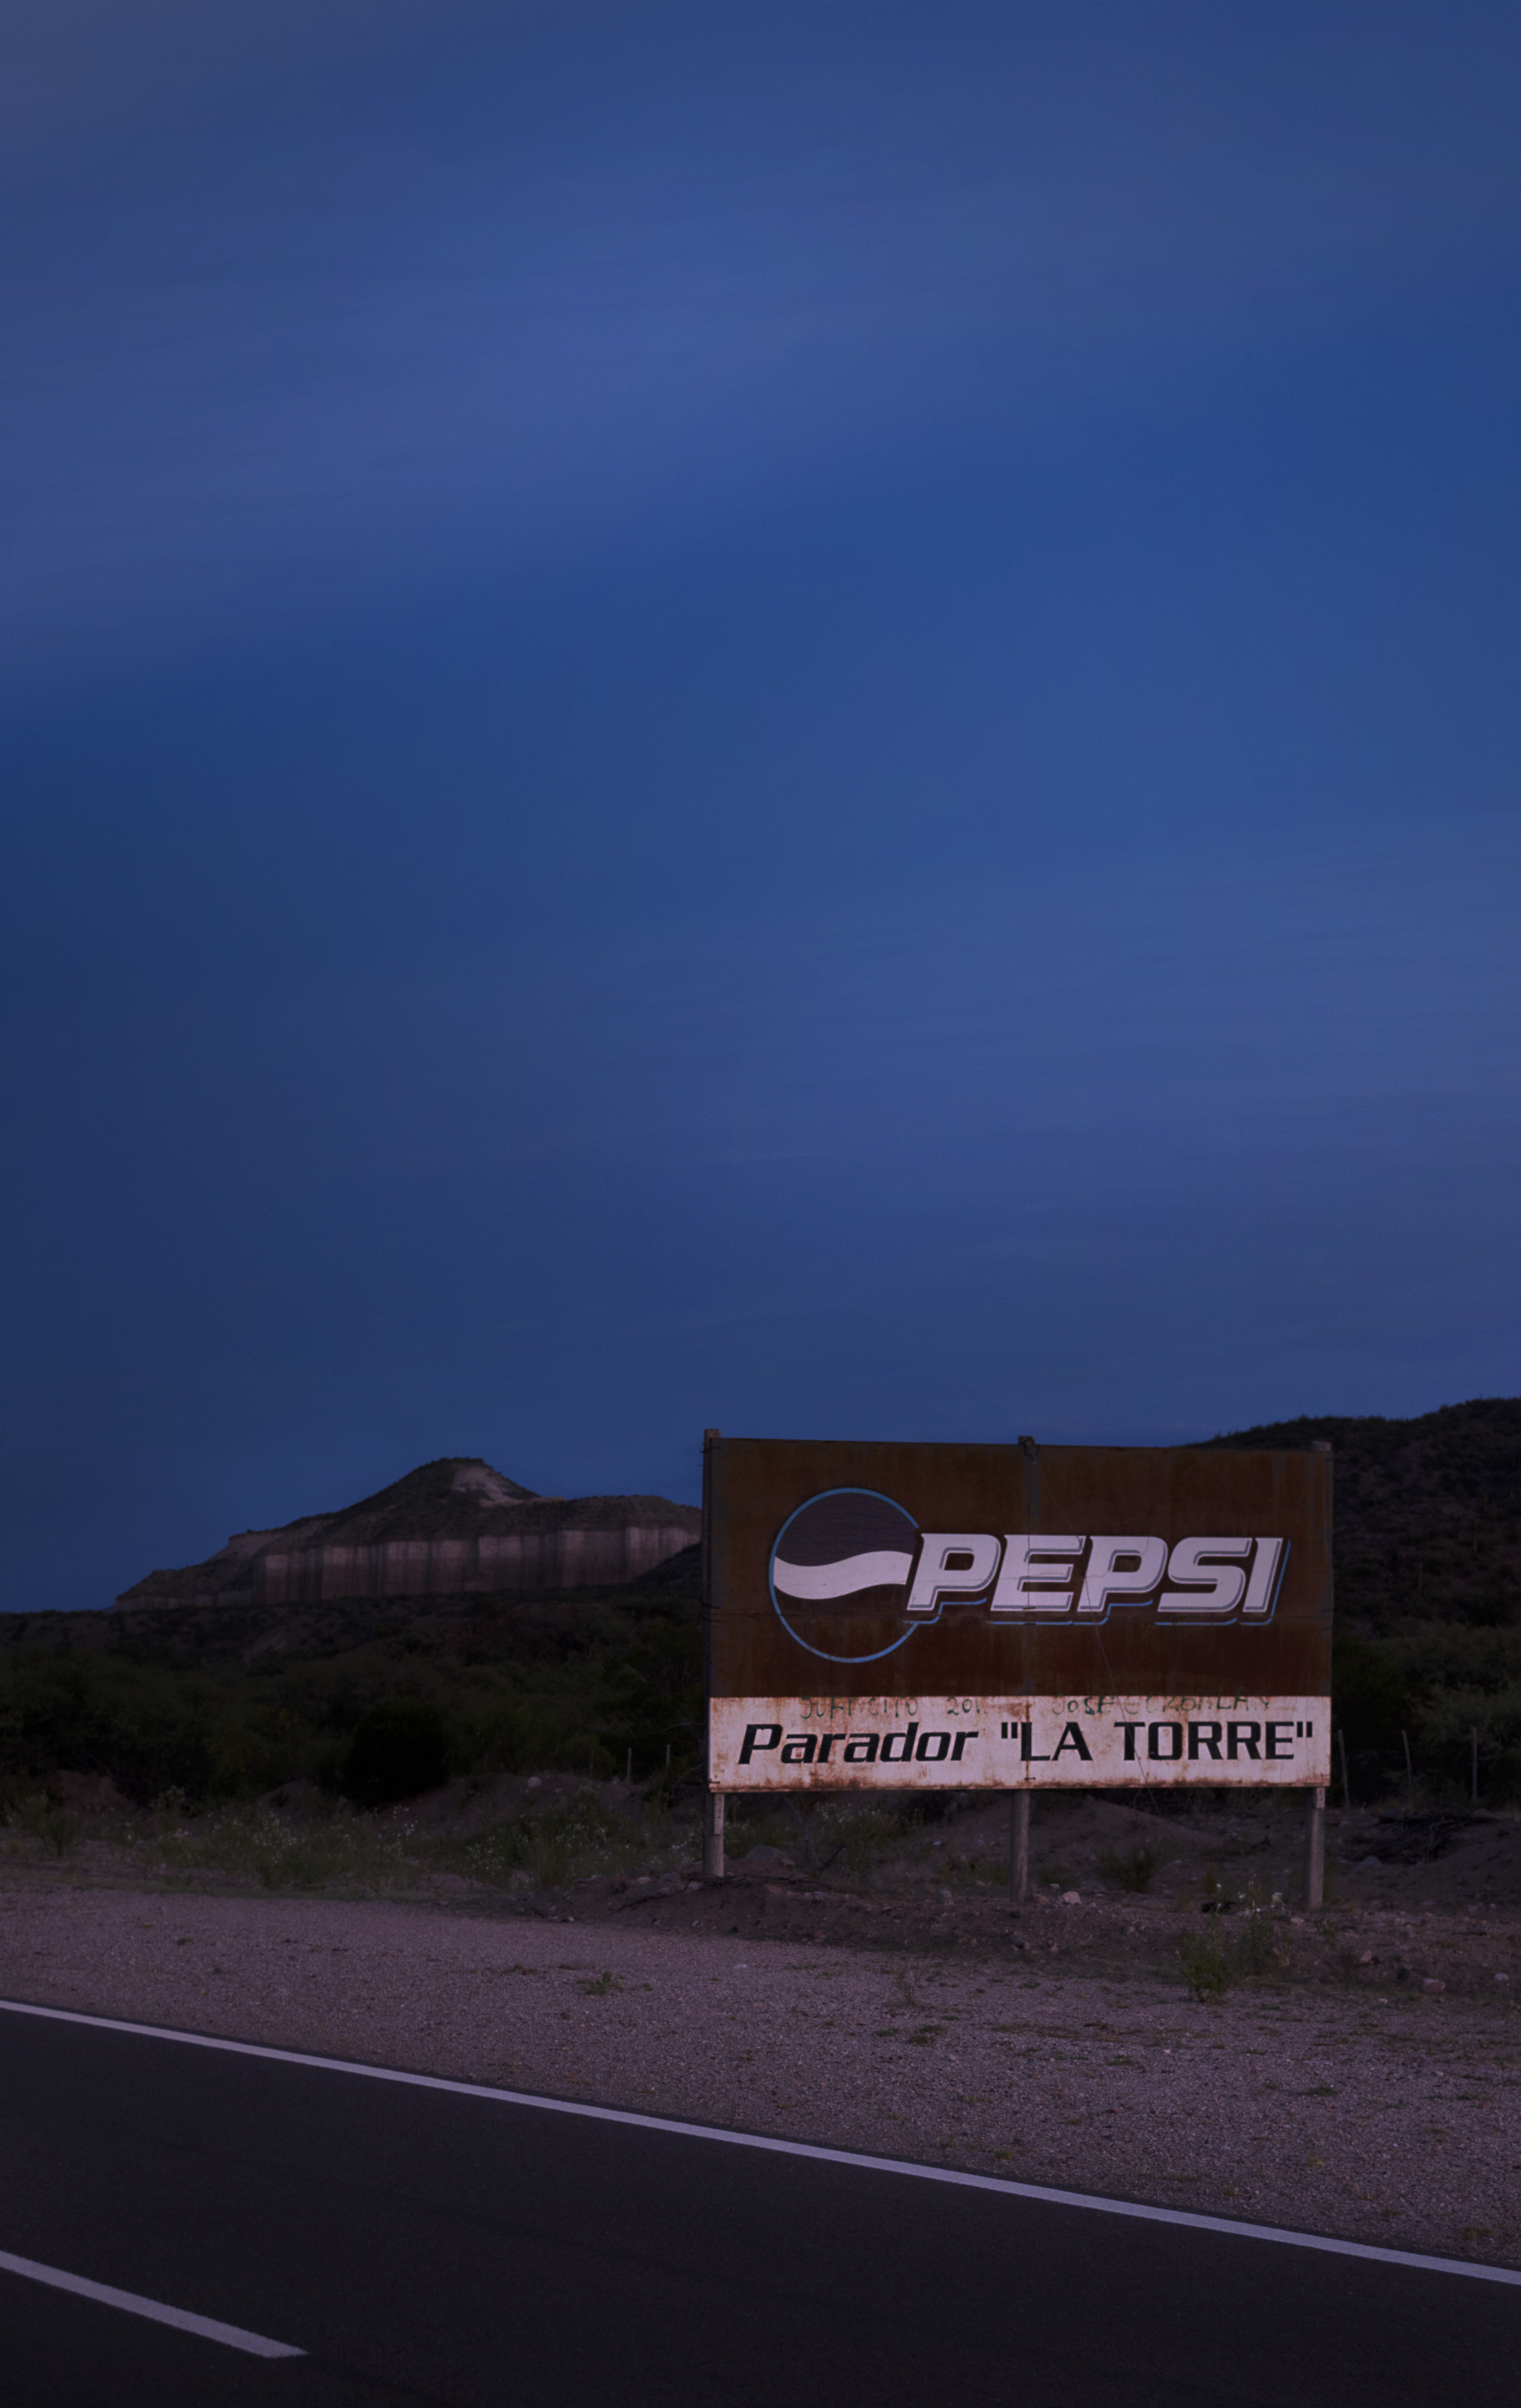 A rusty Pepsi billboard stands against a peaceful desert landscape with clear blue skies in the afternoon. The Pepsi billboard says "Parador la Torre", spanish for "La Torre Gas Station".